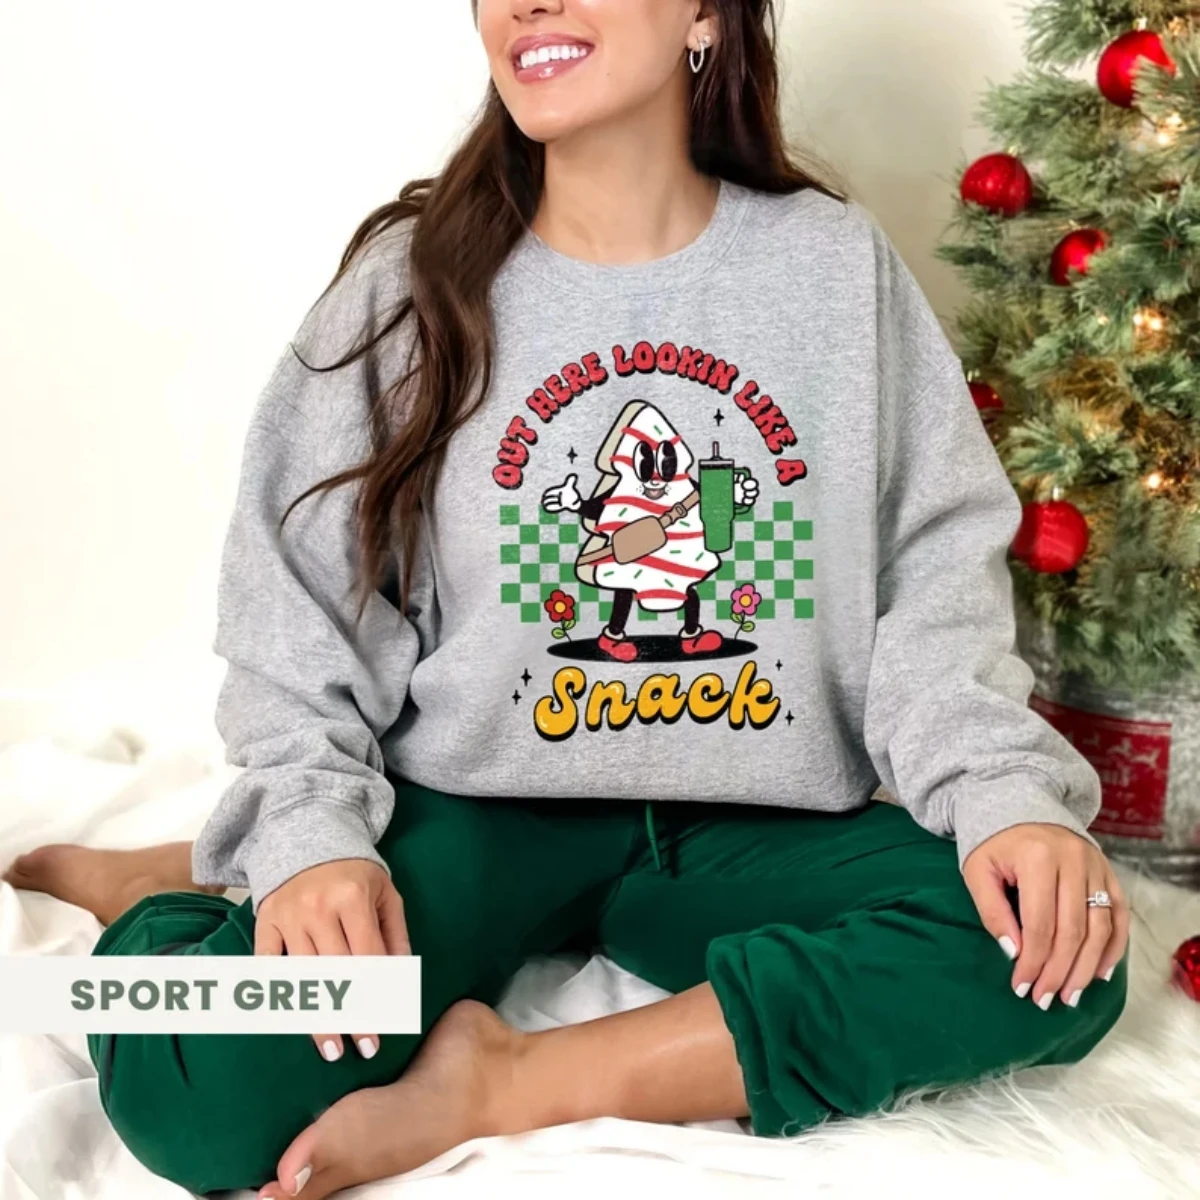 Funny Christmas Sweatshirt Out Here Looking Like A Snack Cake Pullover Shirt Little Debbie Christmas Tree Cake Winter Clothes funny christmas sweatshirt out here looking like a snack cake pullover shirt little debbie christmas tree cake winter clothes